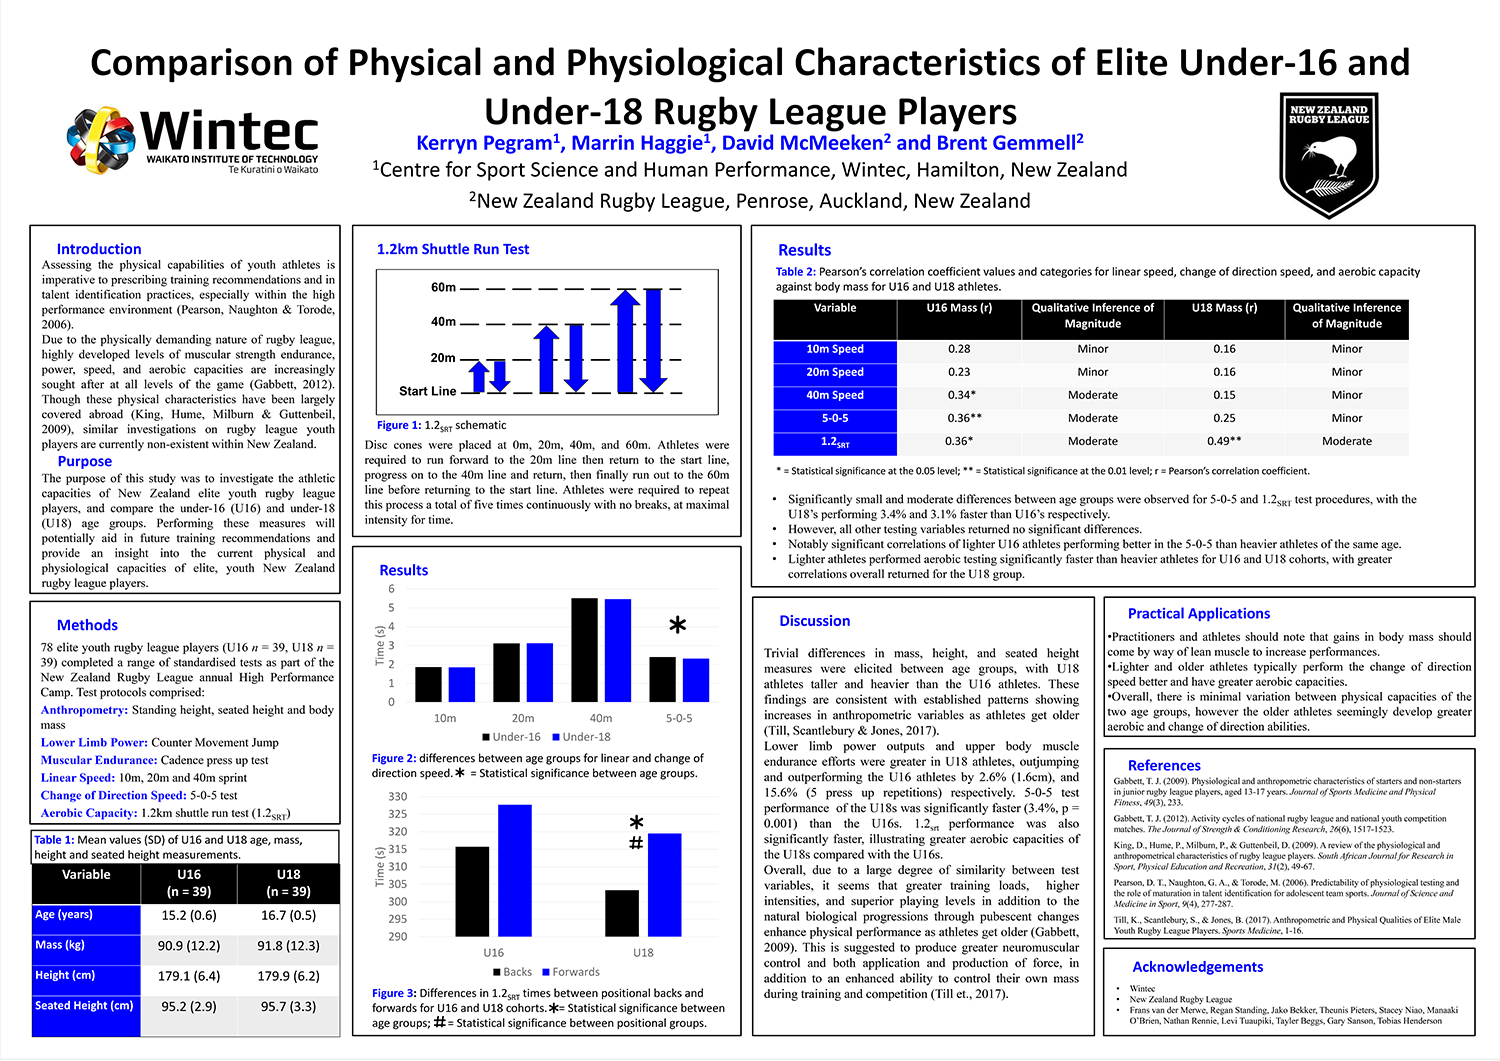 Comparison of Physical and Physiological Characteristics of Elite Under-16 and Under-18 Rugby League Players